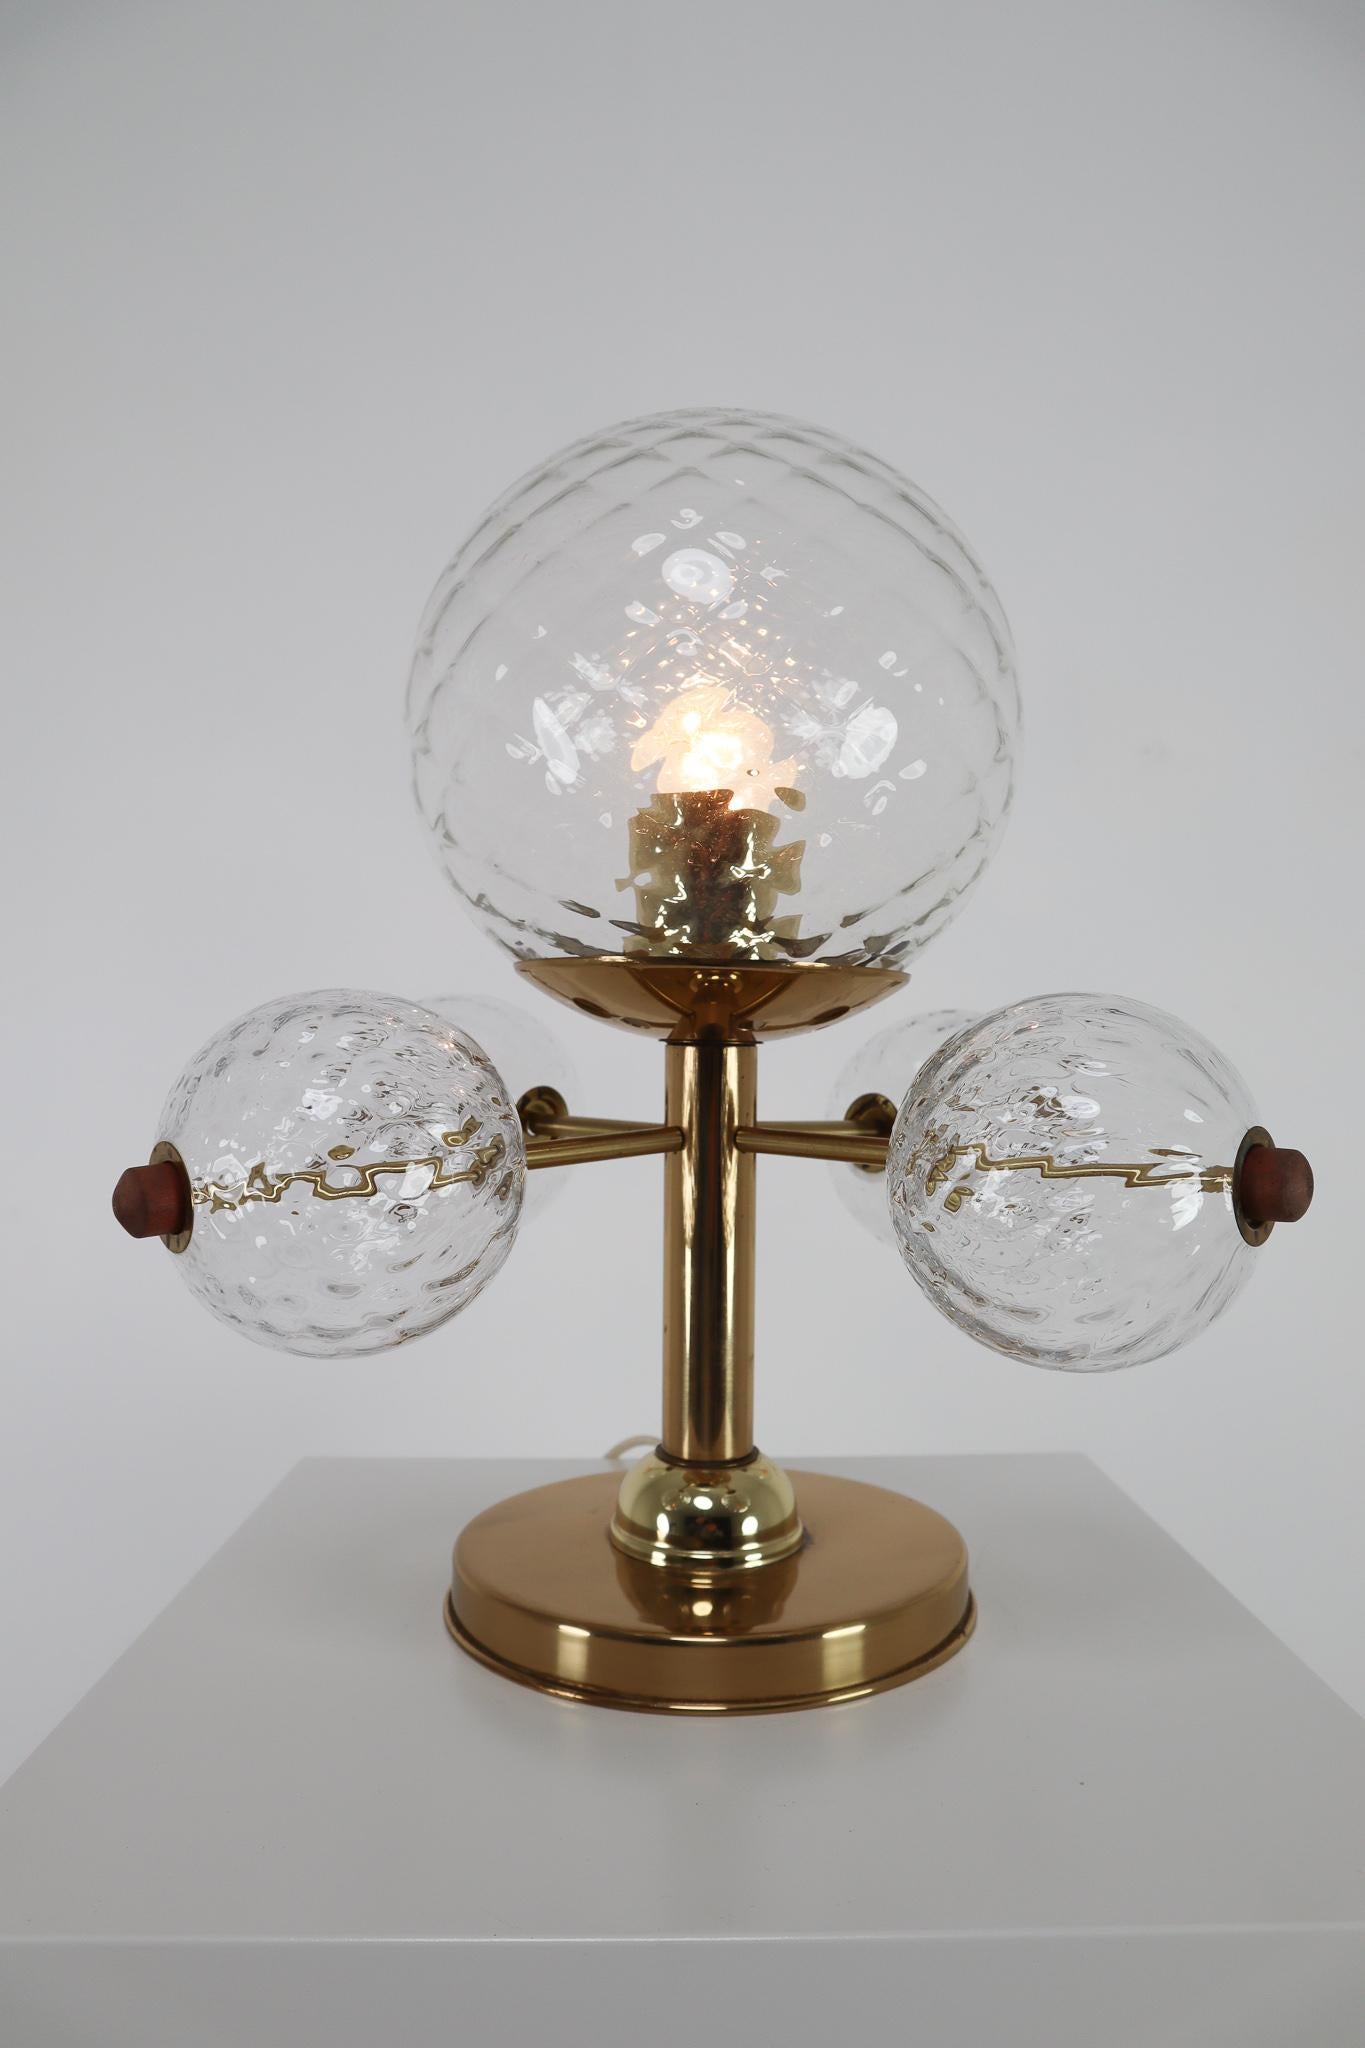 Midcentury Table Lamp with Brass Fixture and Structured Glass, Europe, 1970s For Sale 2